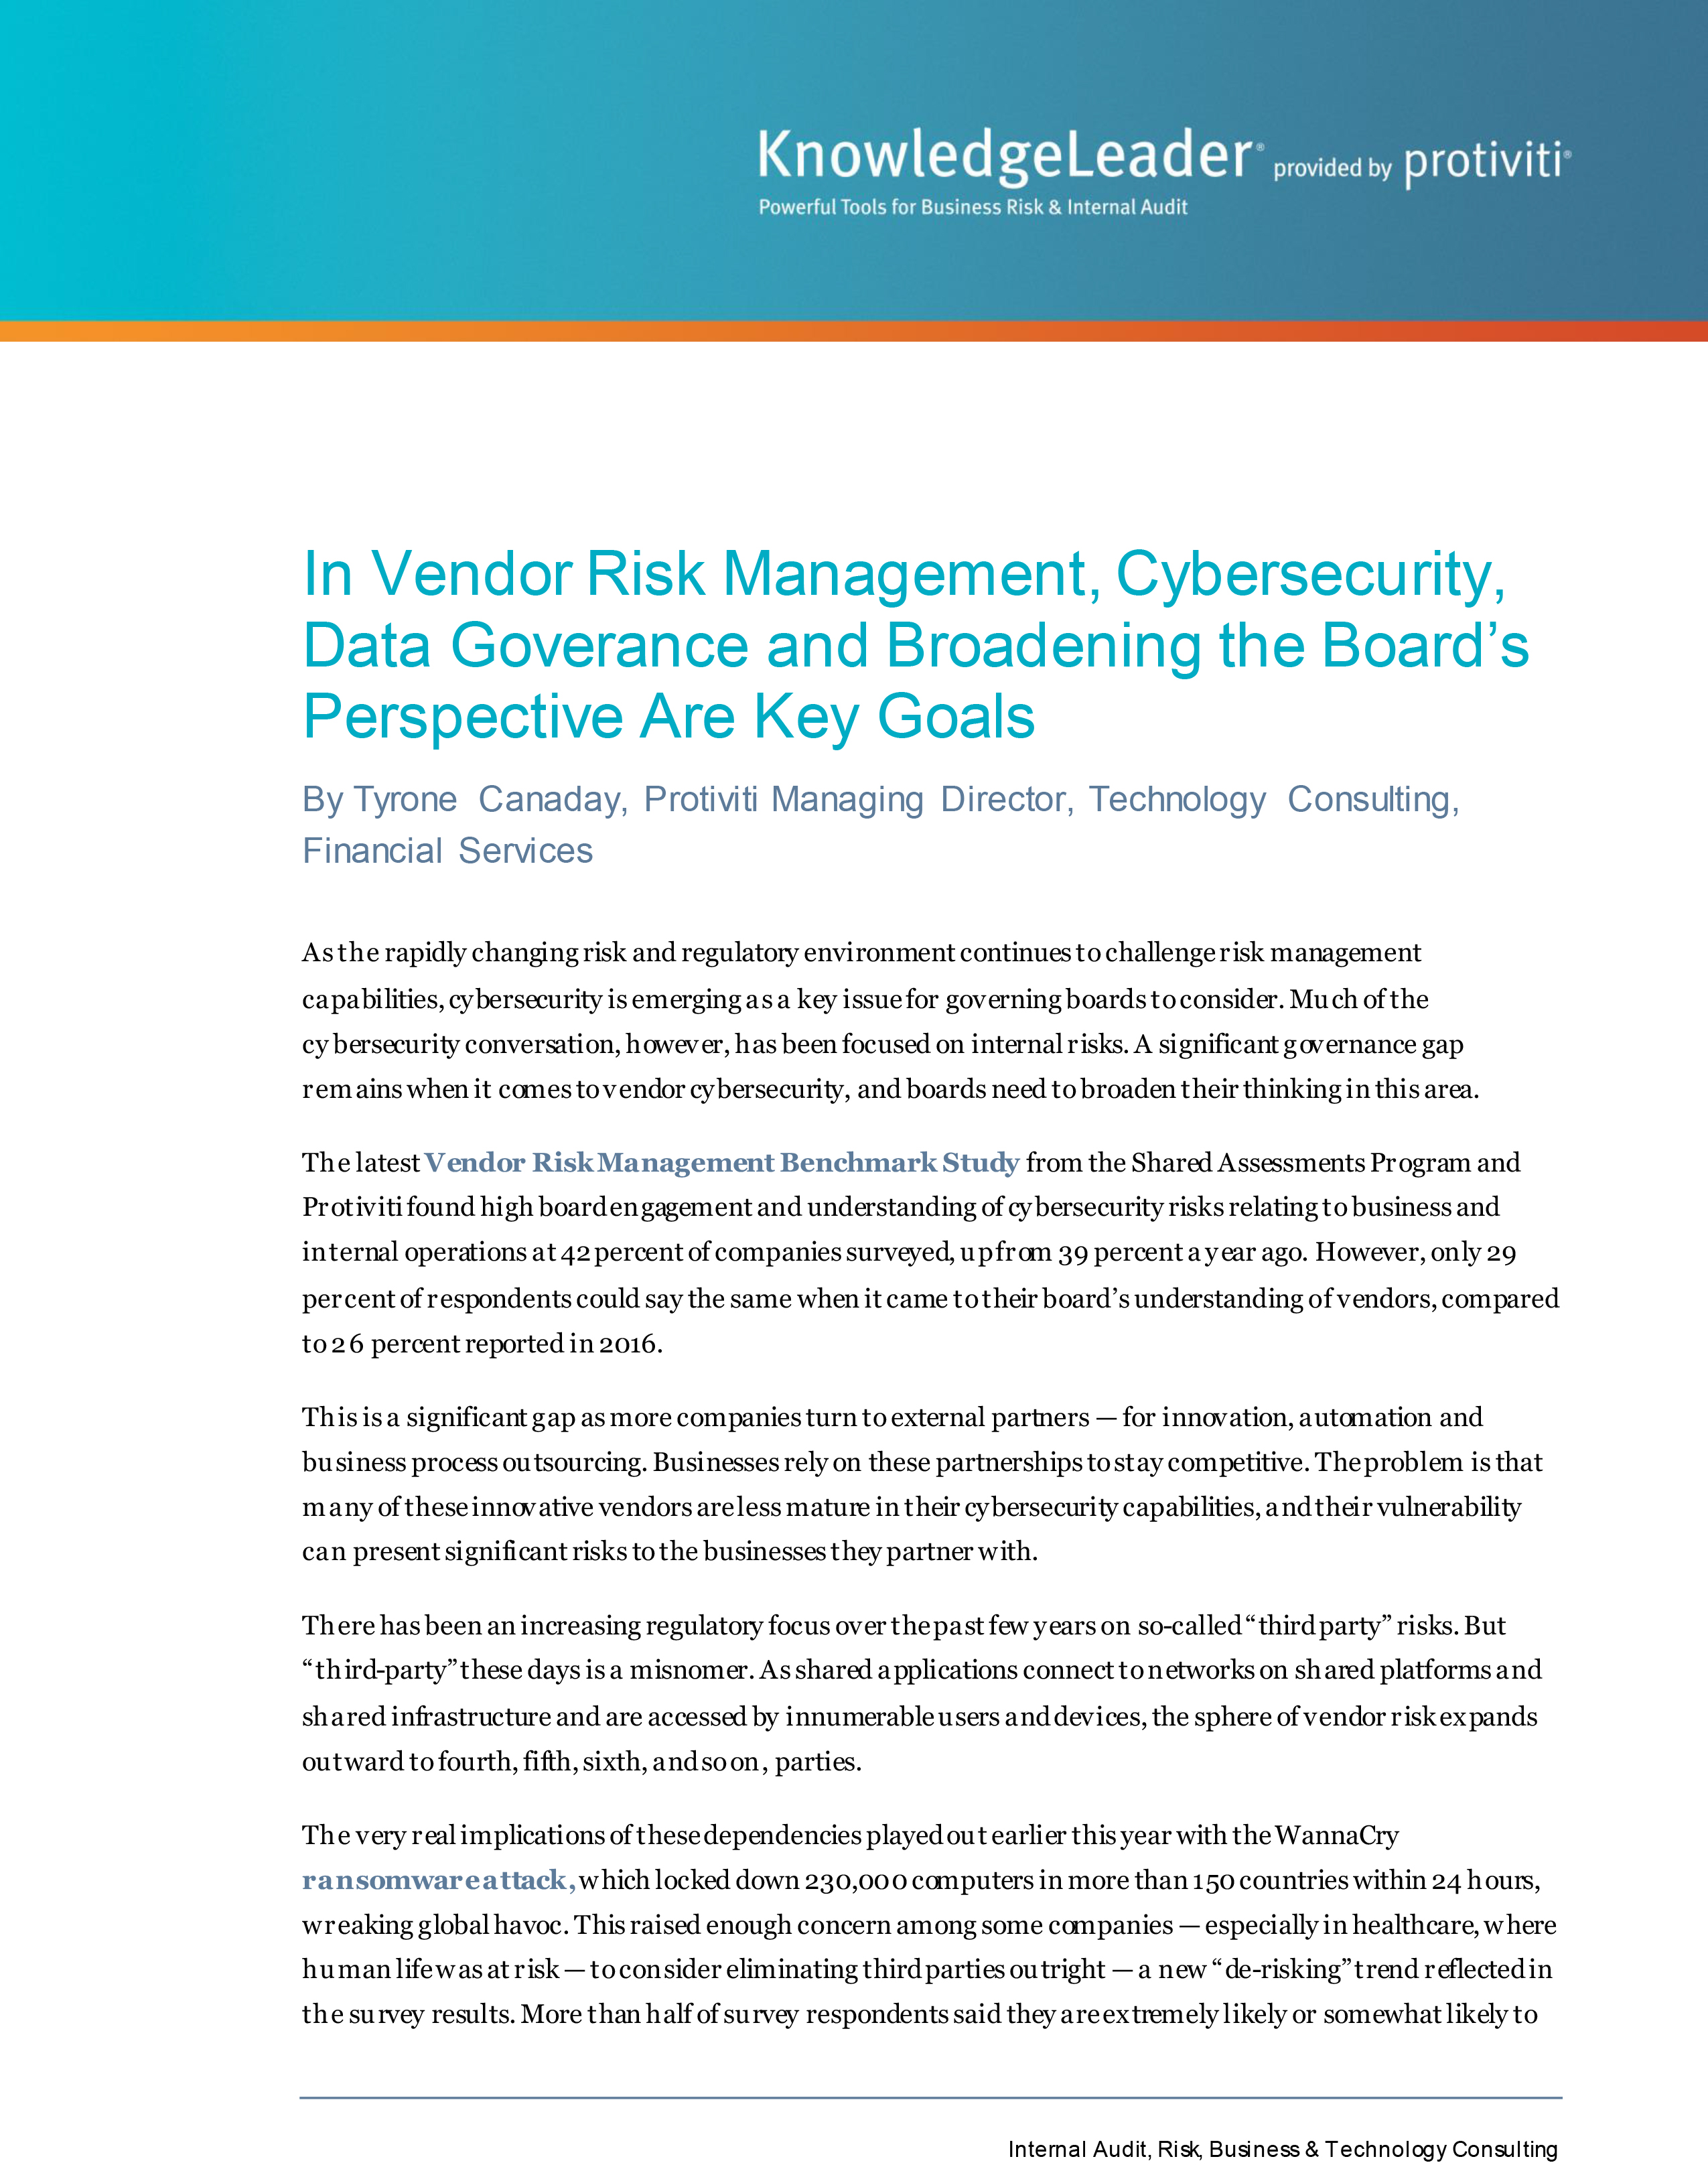 Screenshot of the first page of In Vendor Risk Management, Cybersecurity, Data Governance and Broadening the Board’s Perspective Are Key Goals